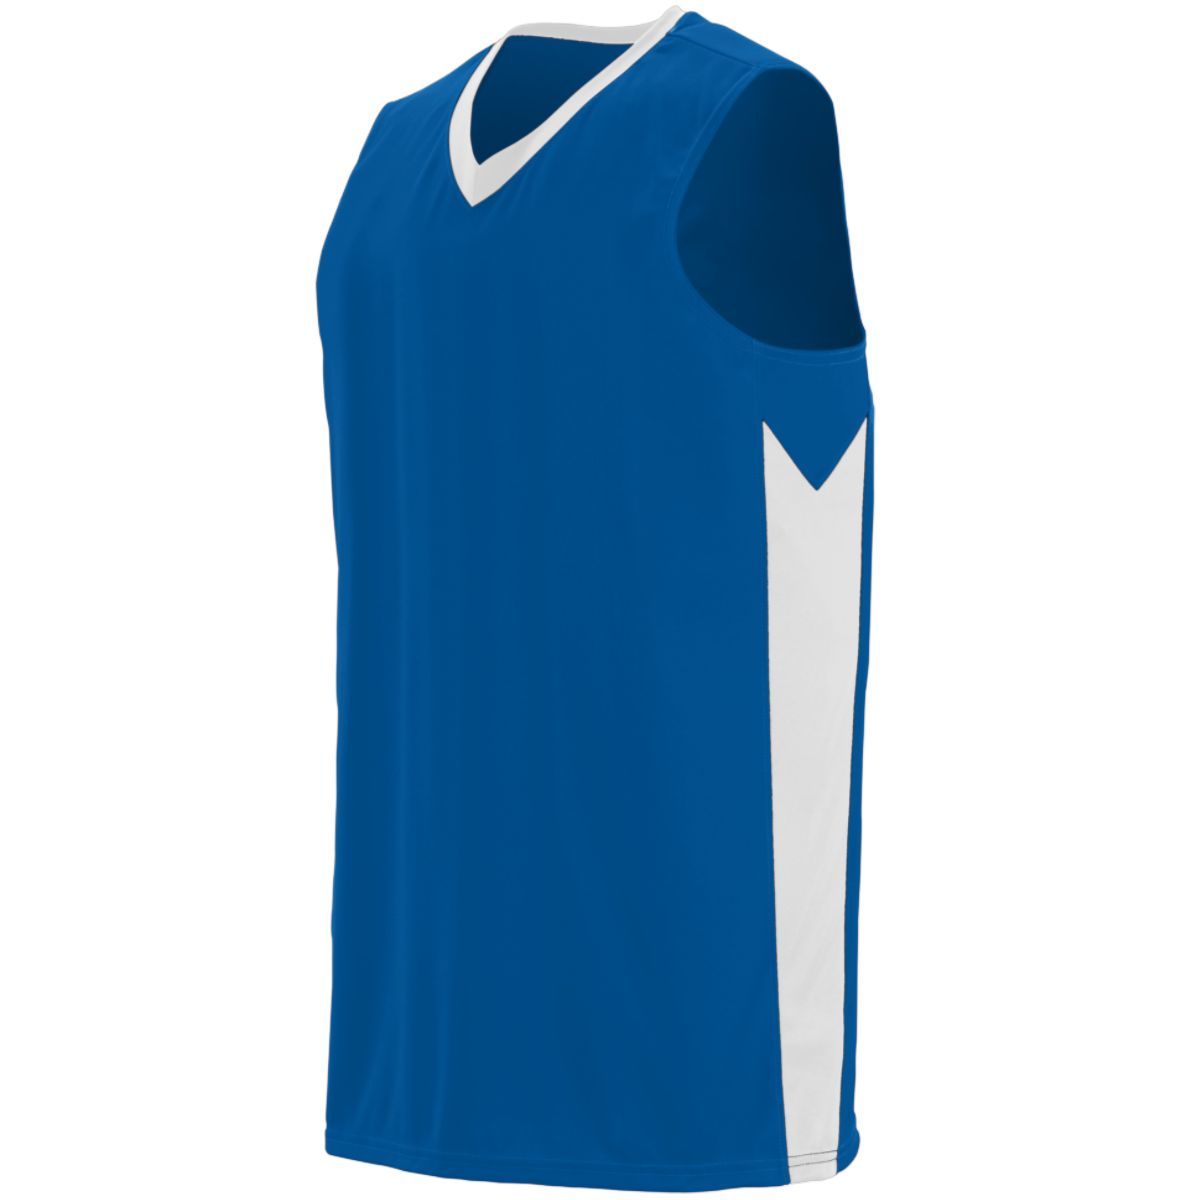 Augusta Sportswear Youth Block Out Jersey in Royal/White  -Part of the Youth, Youth-Jersey, Augusta-Products, Basketball, Shirts, All-Sports, All-Sports-1 product lines at KanaleyCreations.com